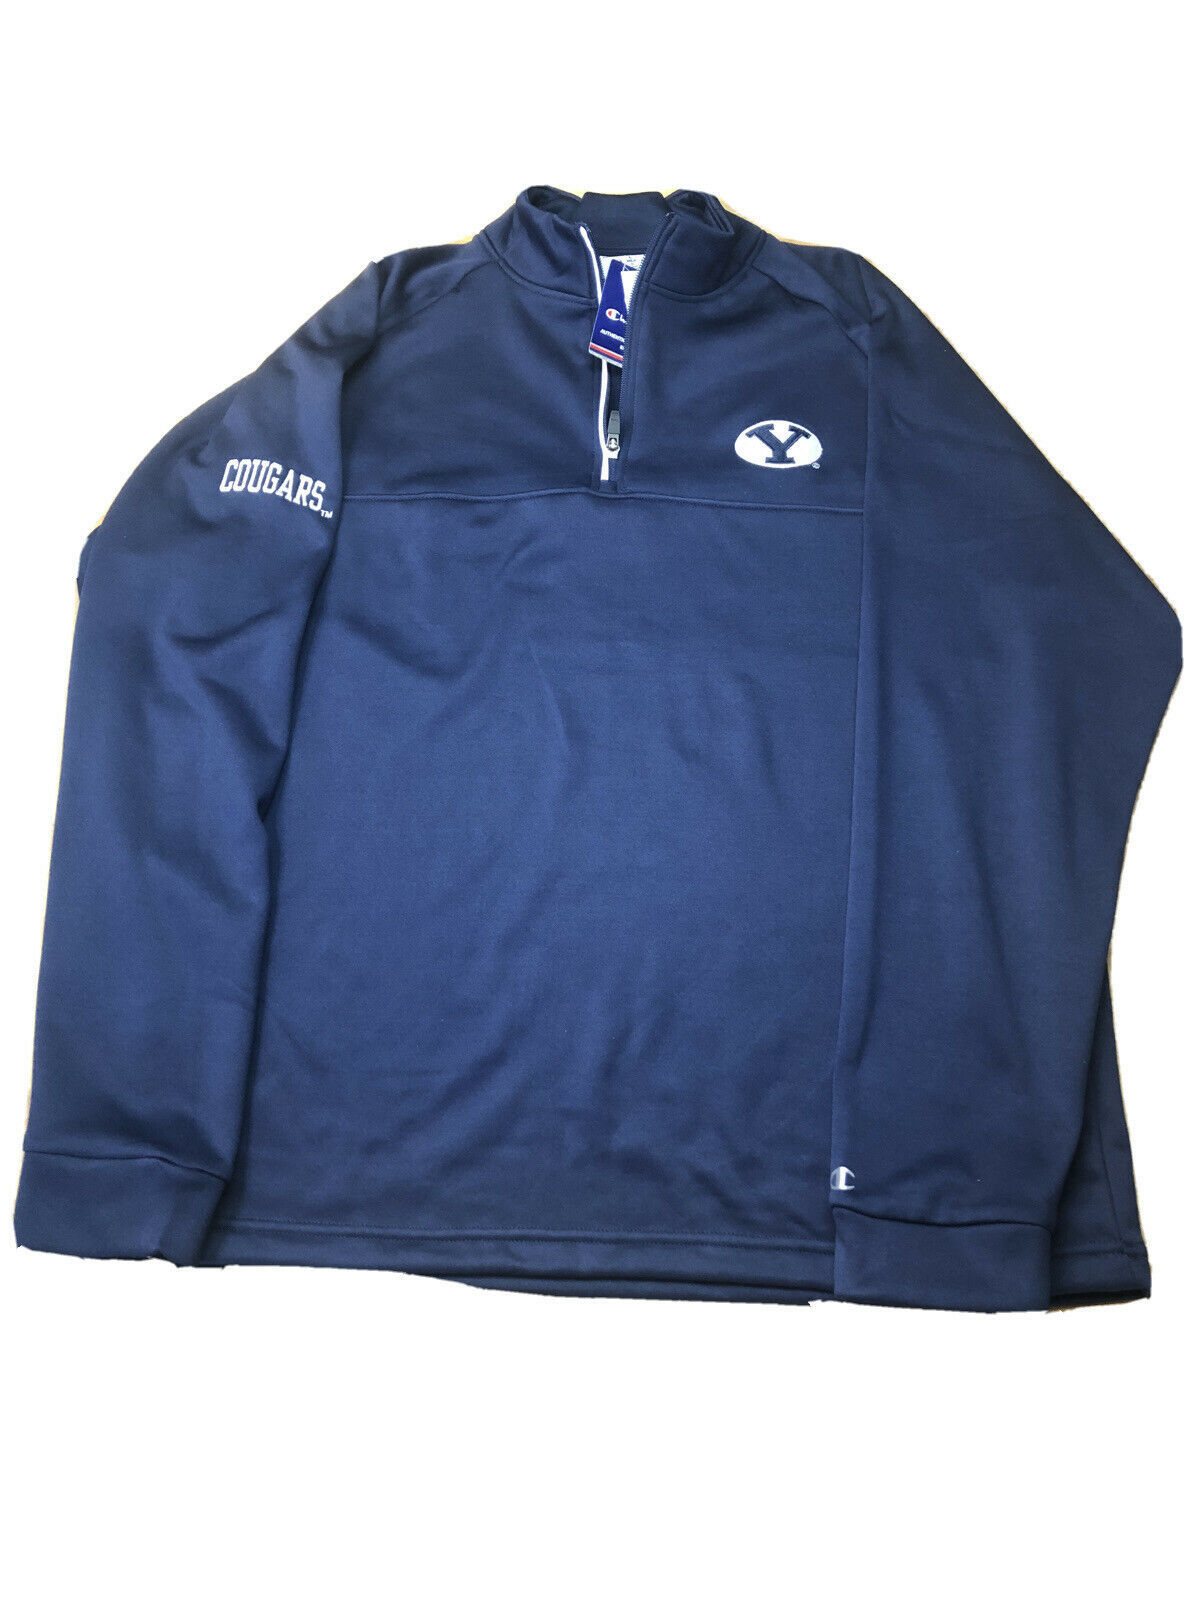 Champion Brigham Young BYU Cougars 1/2 Zip Pullover Jacket Blue Lrg Embroidered - $24.74